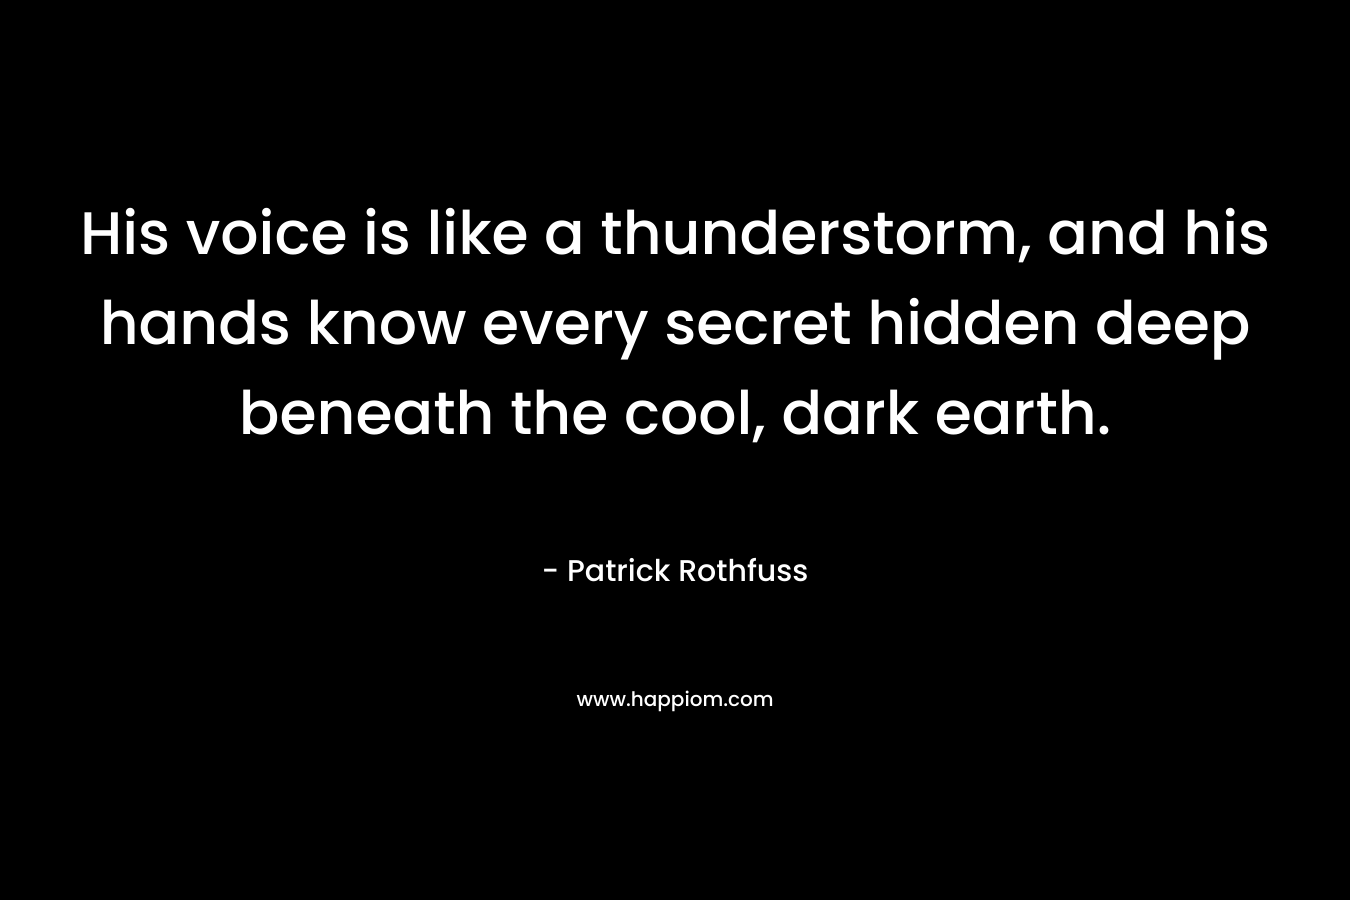 His voice is like a thunderstorm, and his hands know every secret hidden deep beneath the cool, dark earth. – Patrick Rothfuss